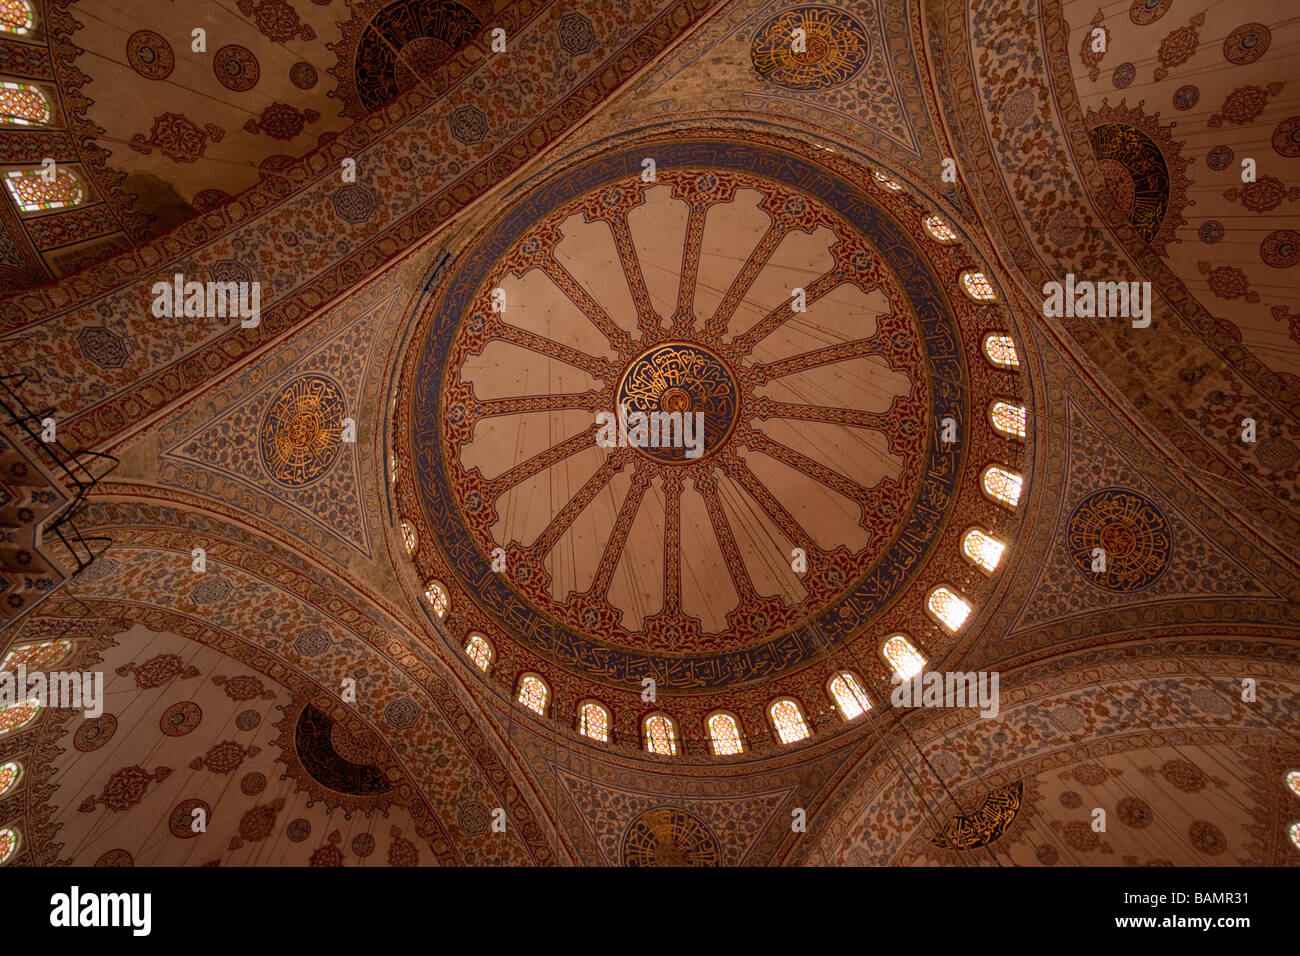 Blue mosque domed ceiling Stock Photo